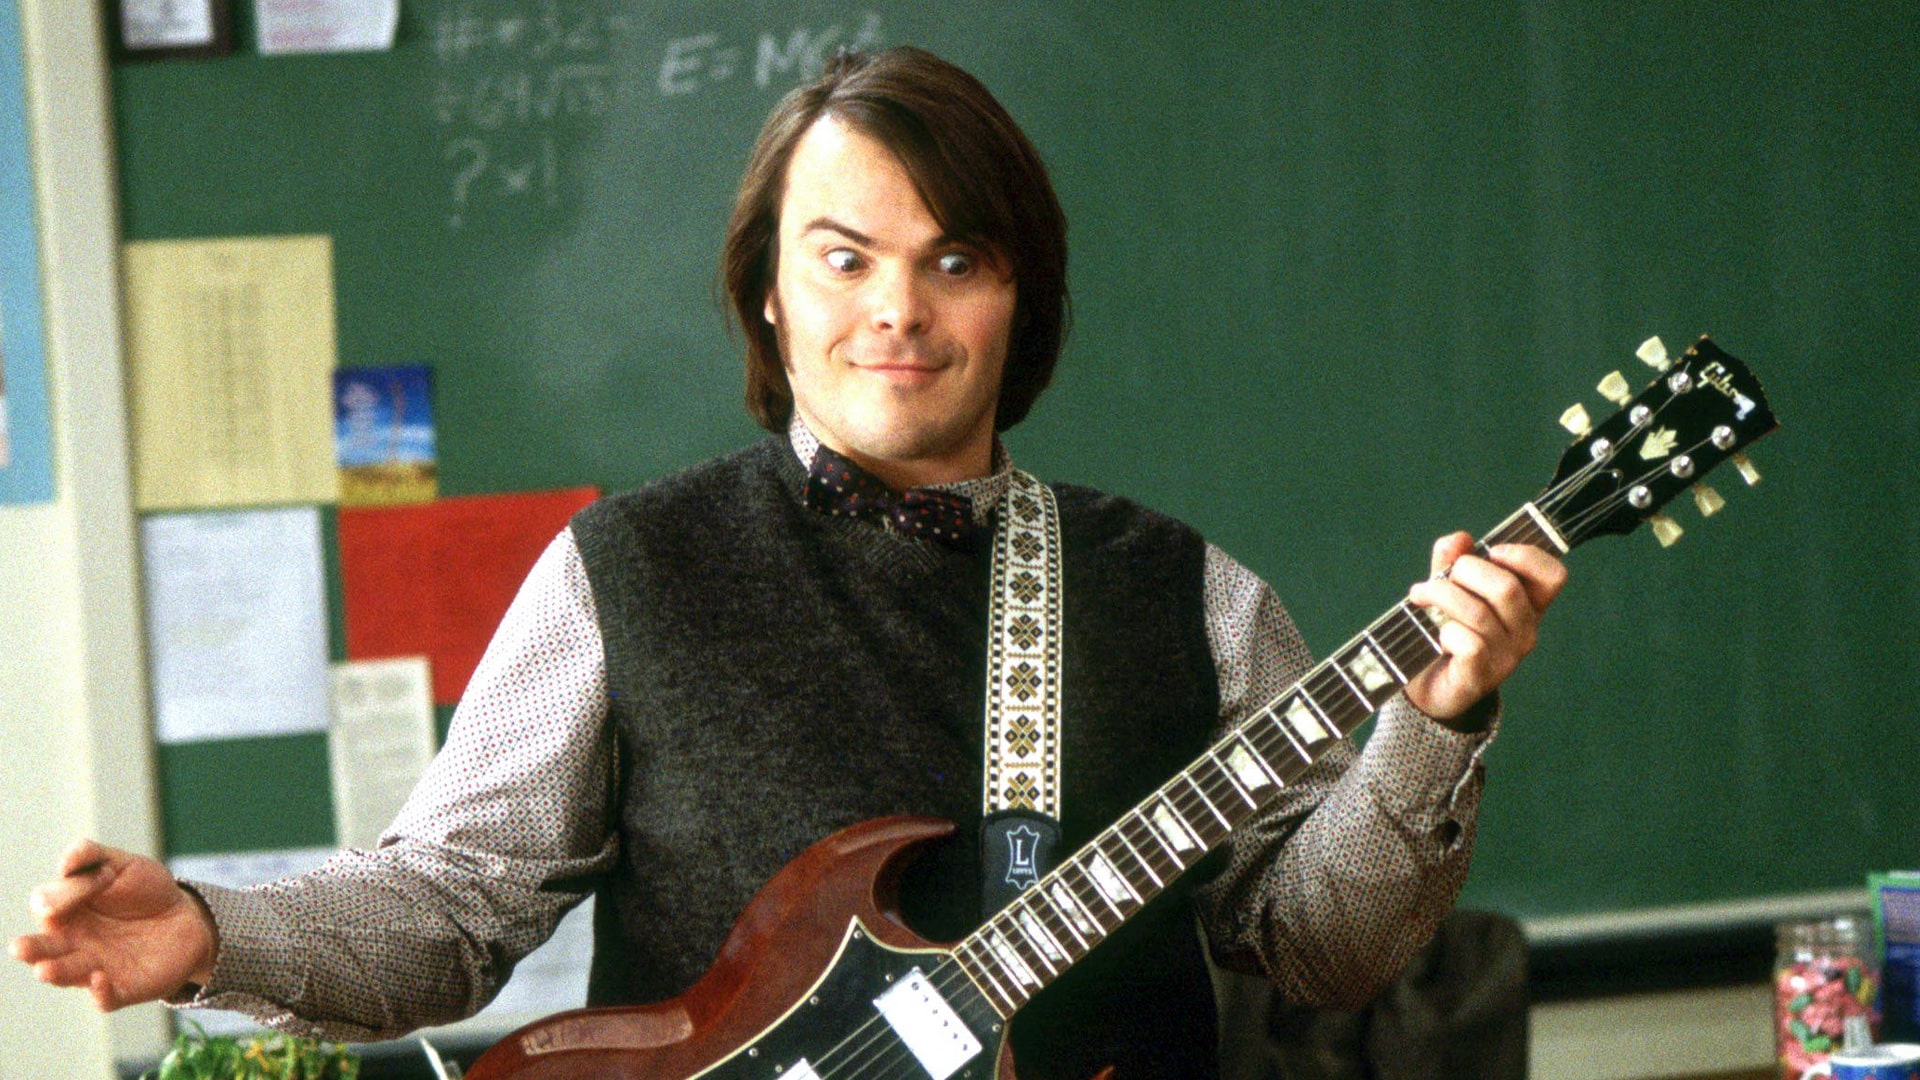 School Of Rock Movie - 26 School Of Rock (2004) Movie Facts You Haven't Read Before